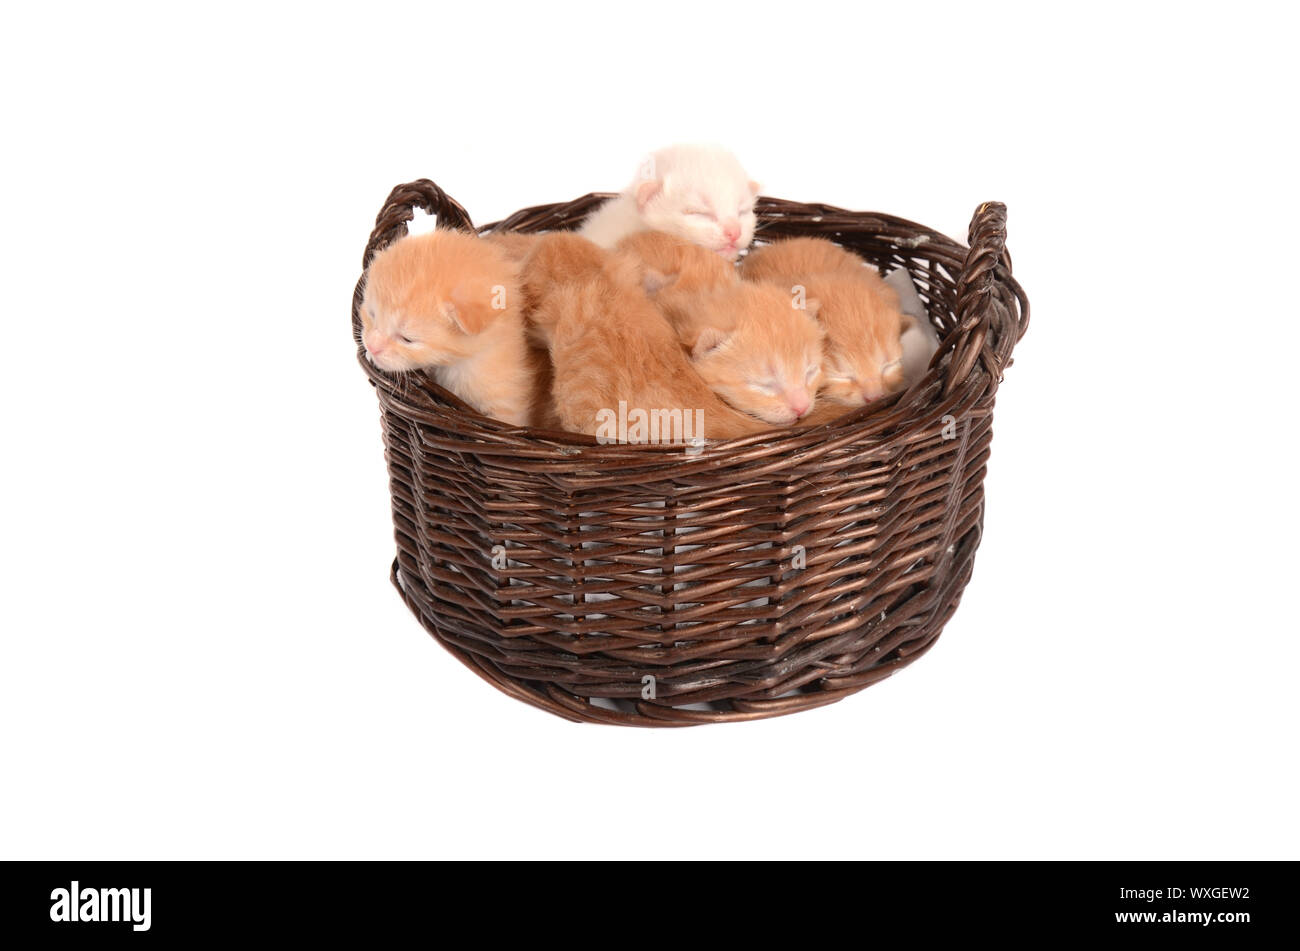 Newborn ginger, orange, white, marmalade, and champagne kittens in a basket. Stock Photo